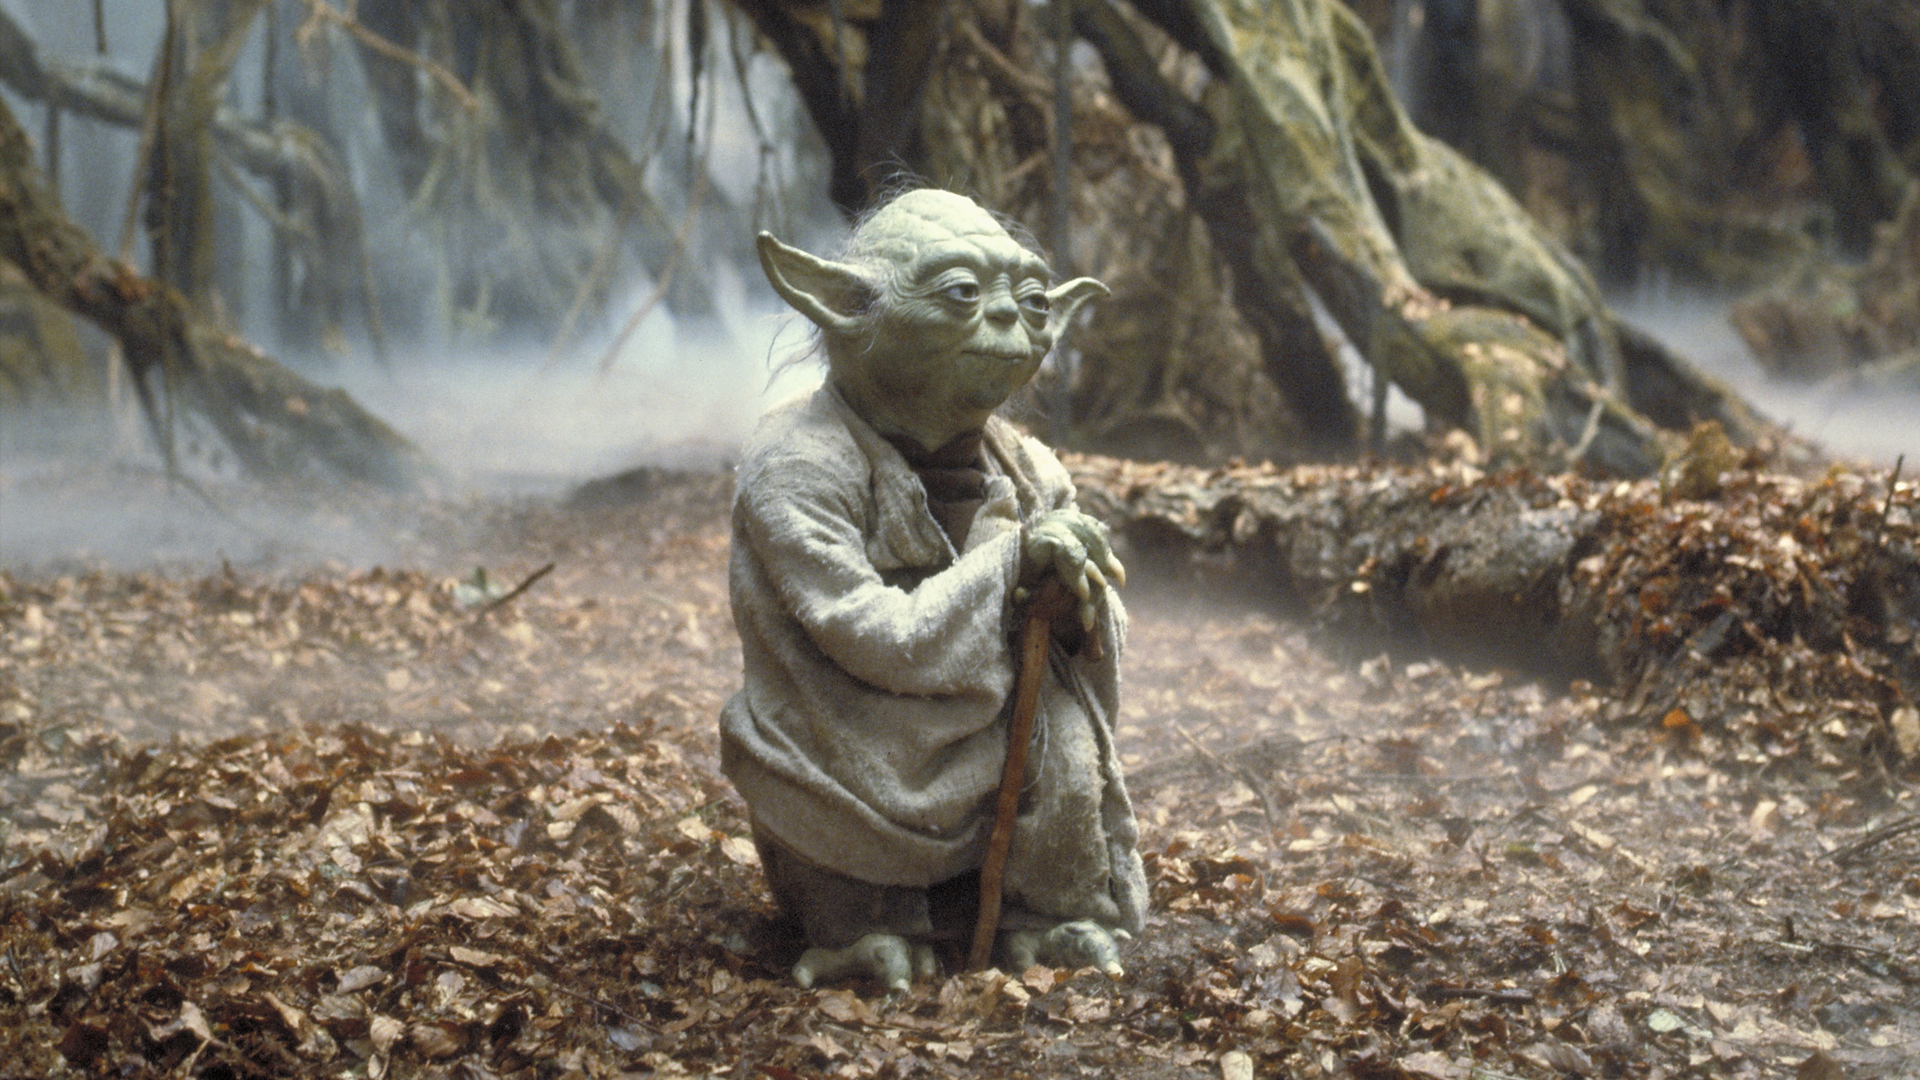 Yoda puppeteered by Frank Oz as seen in The Empire Strikes Back (1980). © & ™ Lucasfilm. All Rights Reserved